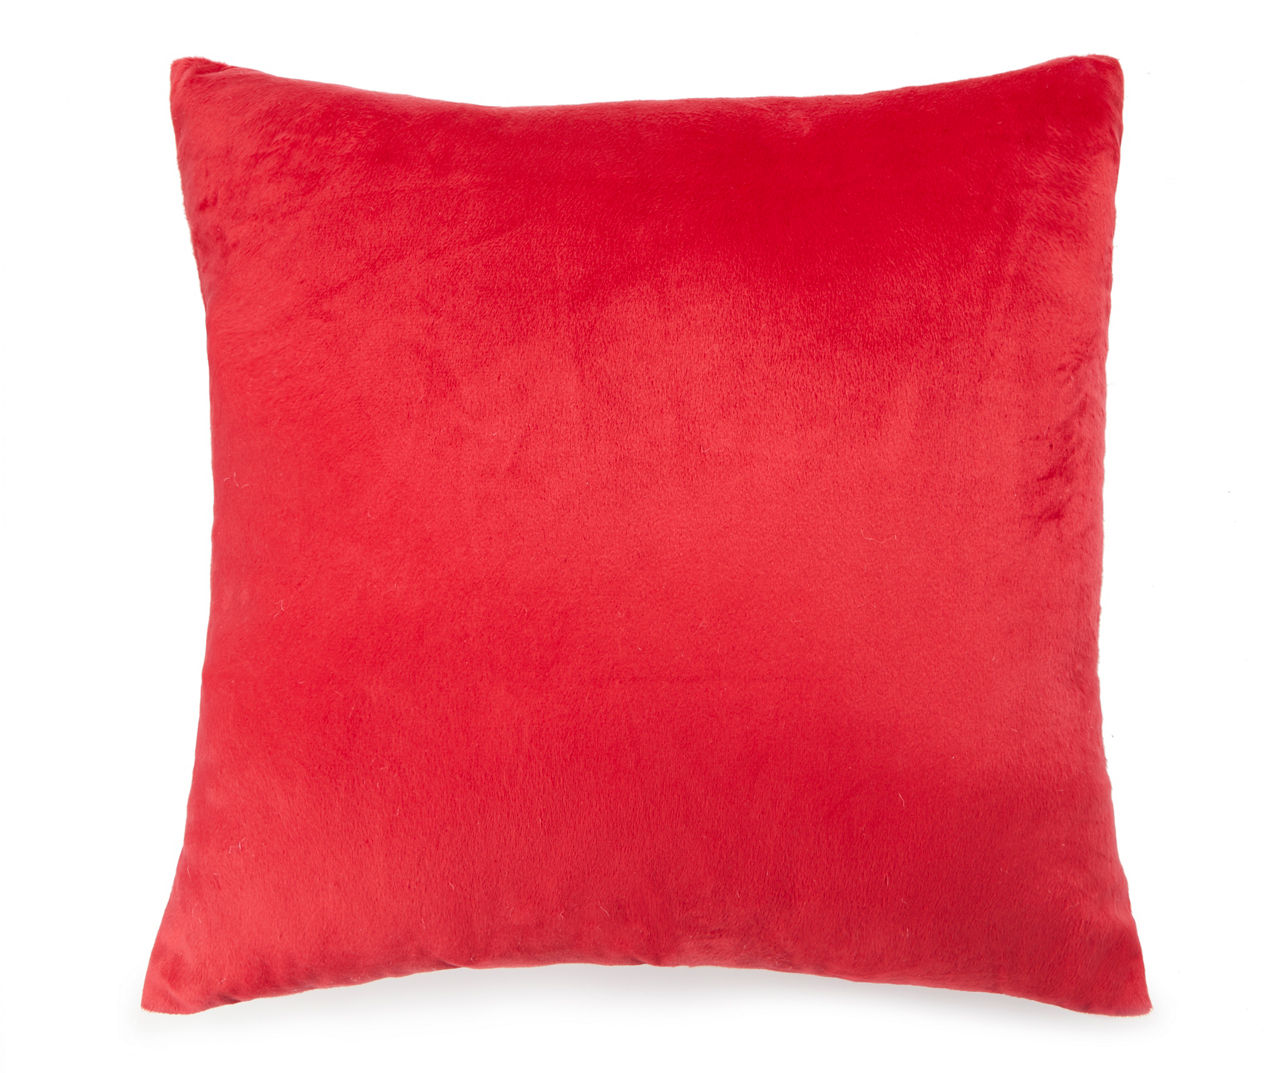 VHC Brands Shasta Cabin 18x18 Throw Pillow, Color: Chili Pepper